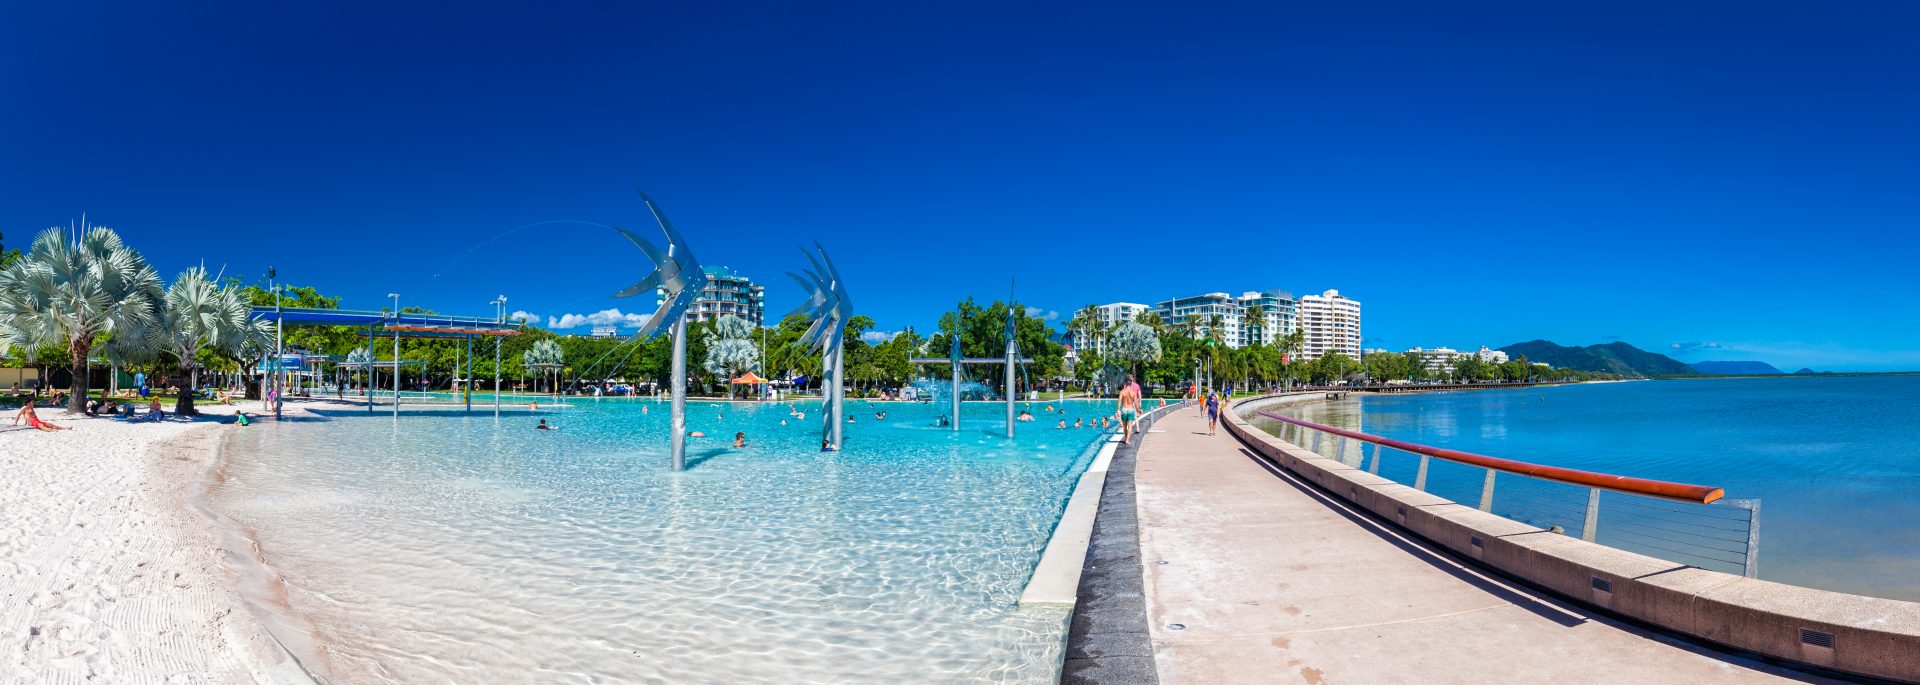 australia cairns Five reasons Cairns should be on your bucket list